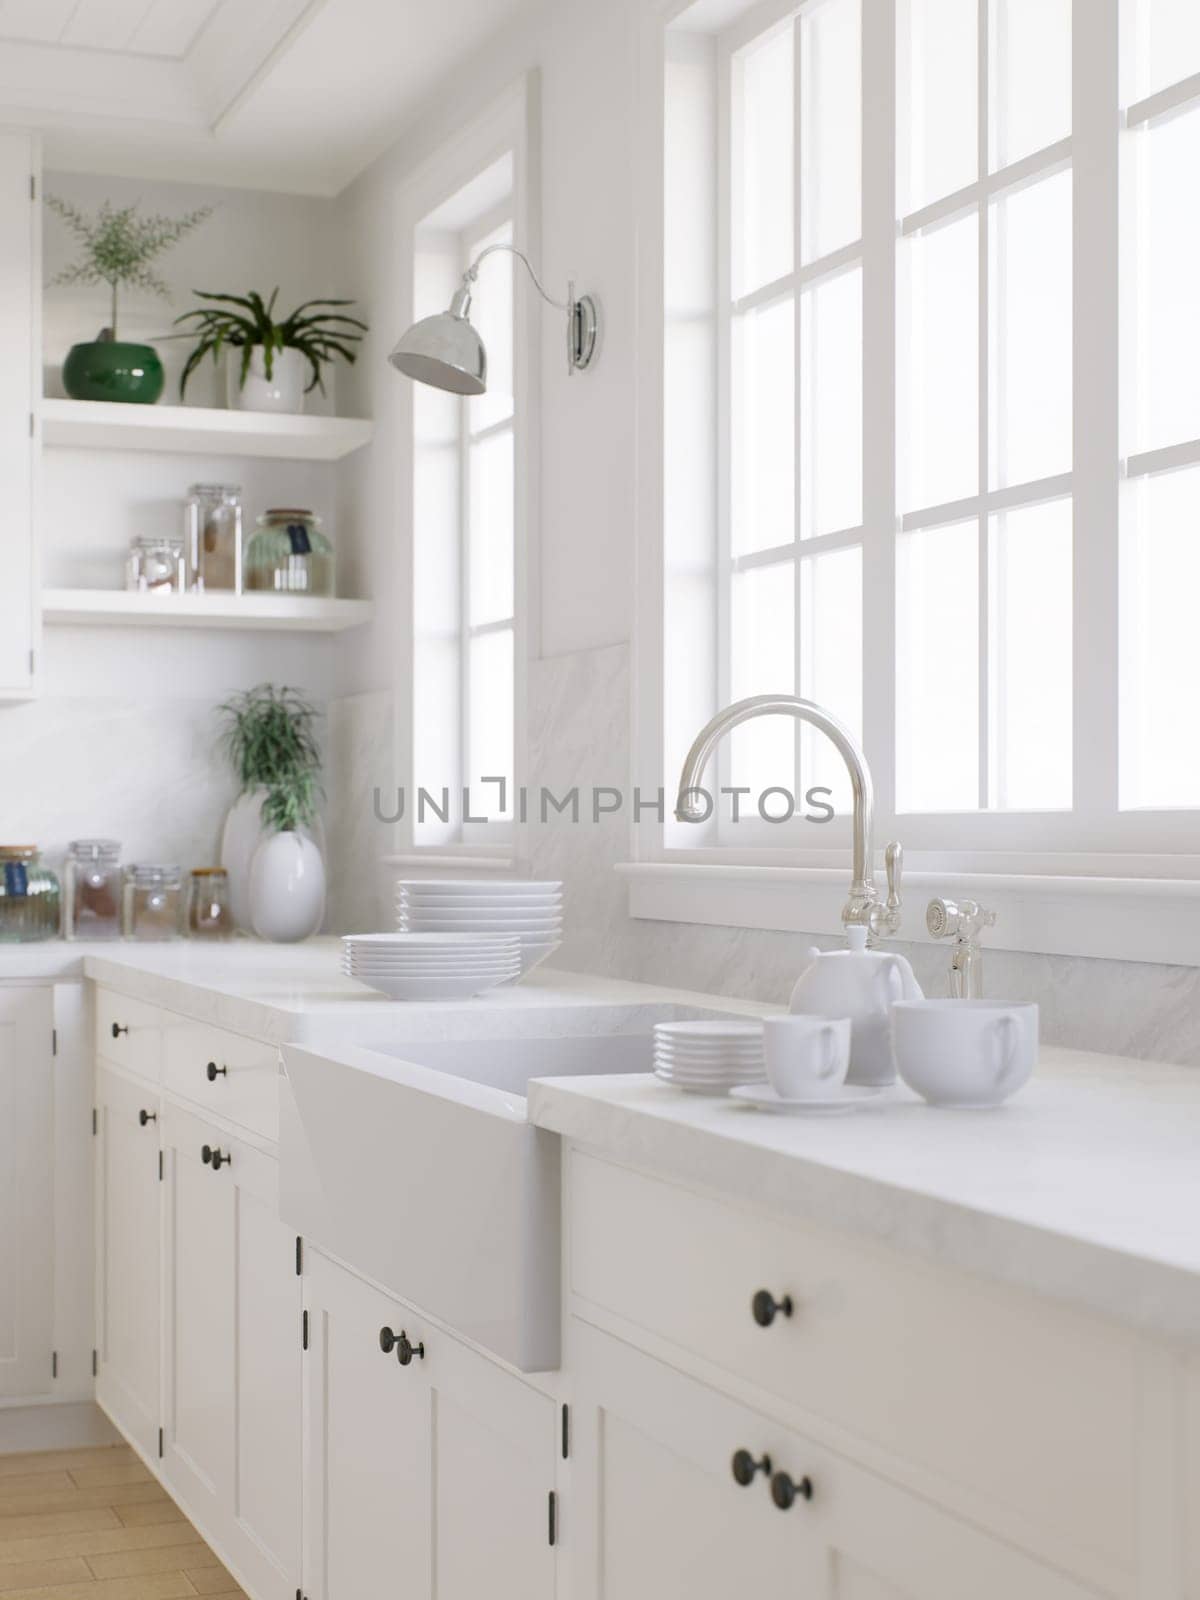 Kitchen sink by the window with dishes. Stylish, bright kitchen in traditional style. 3D rendering